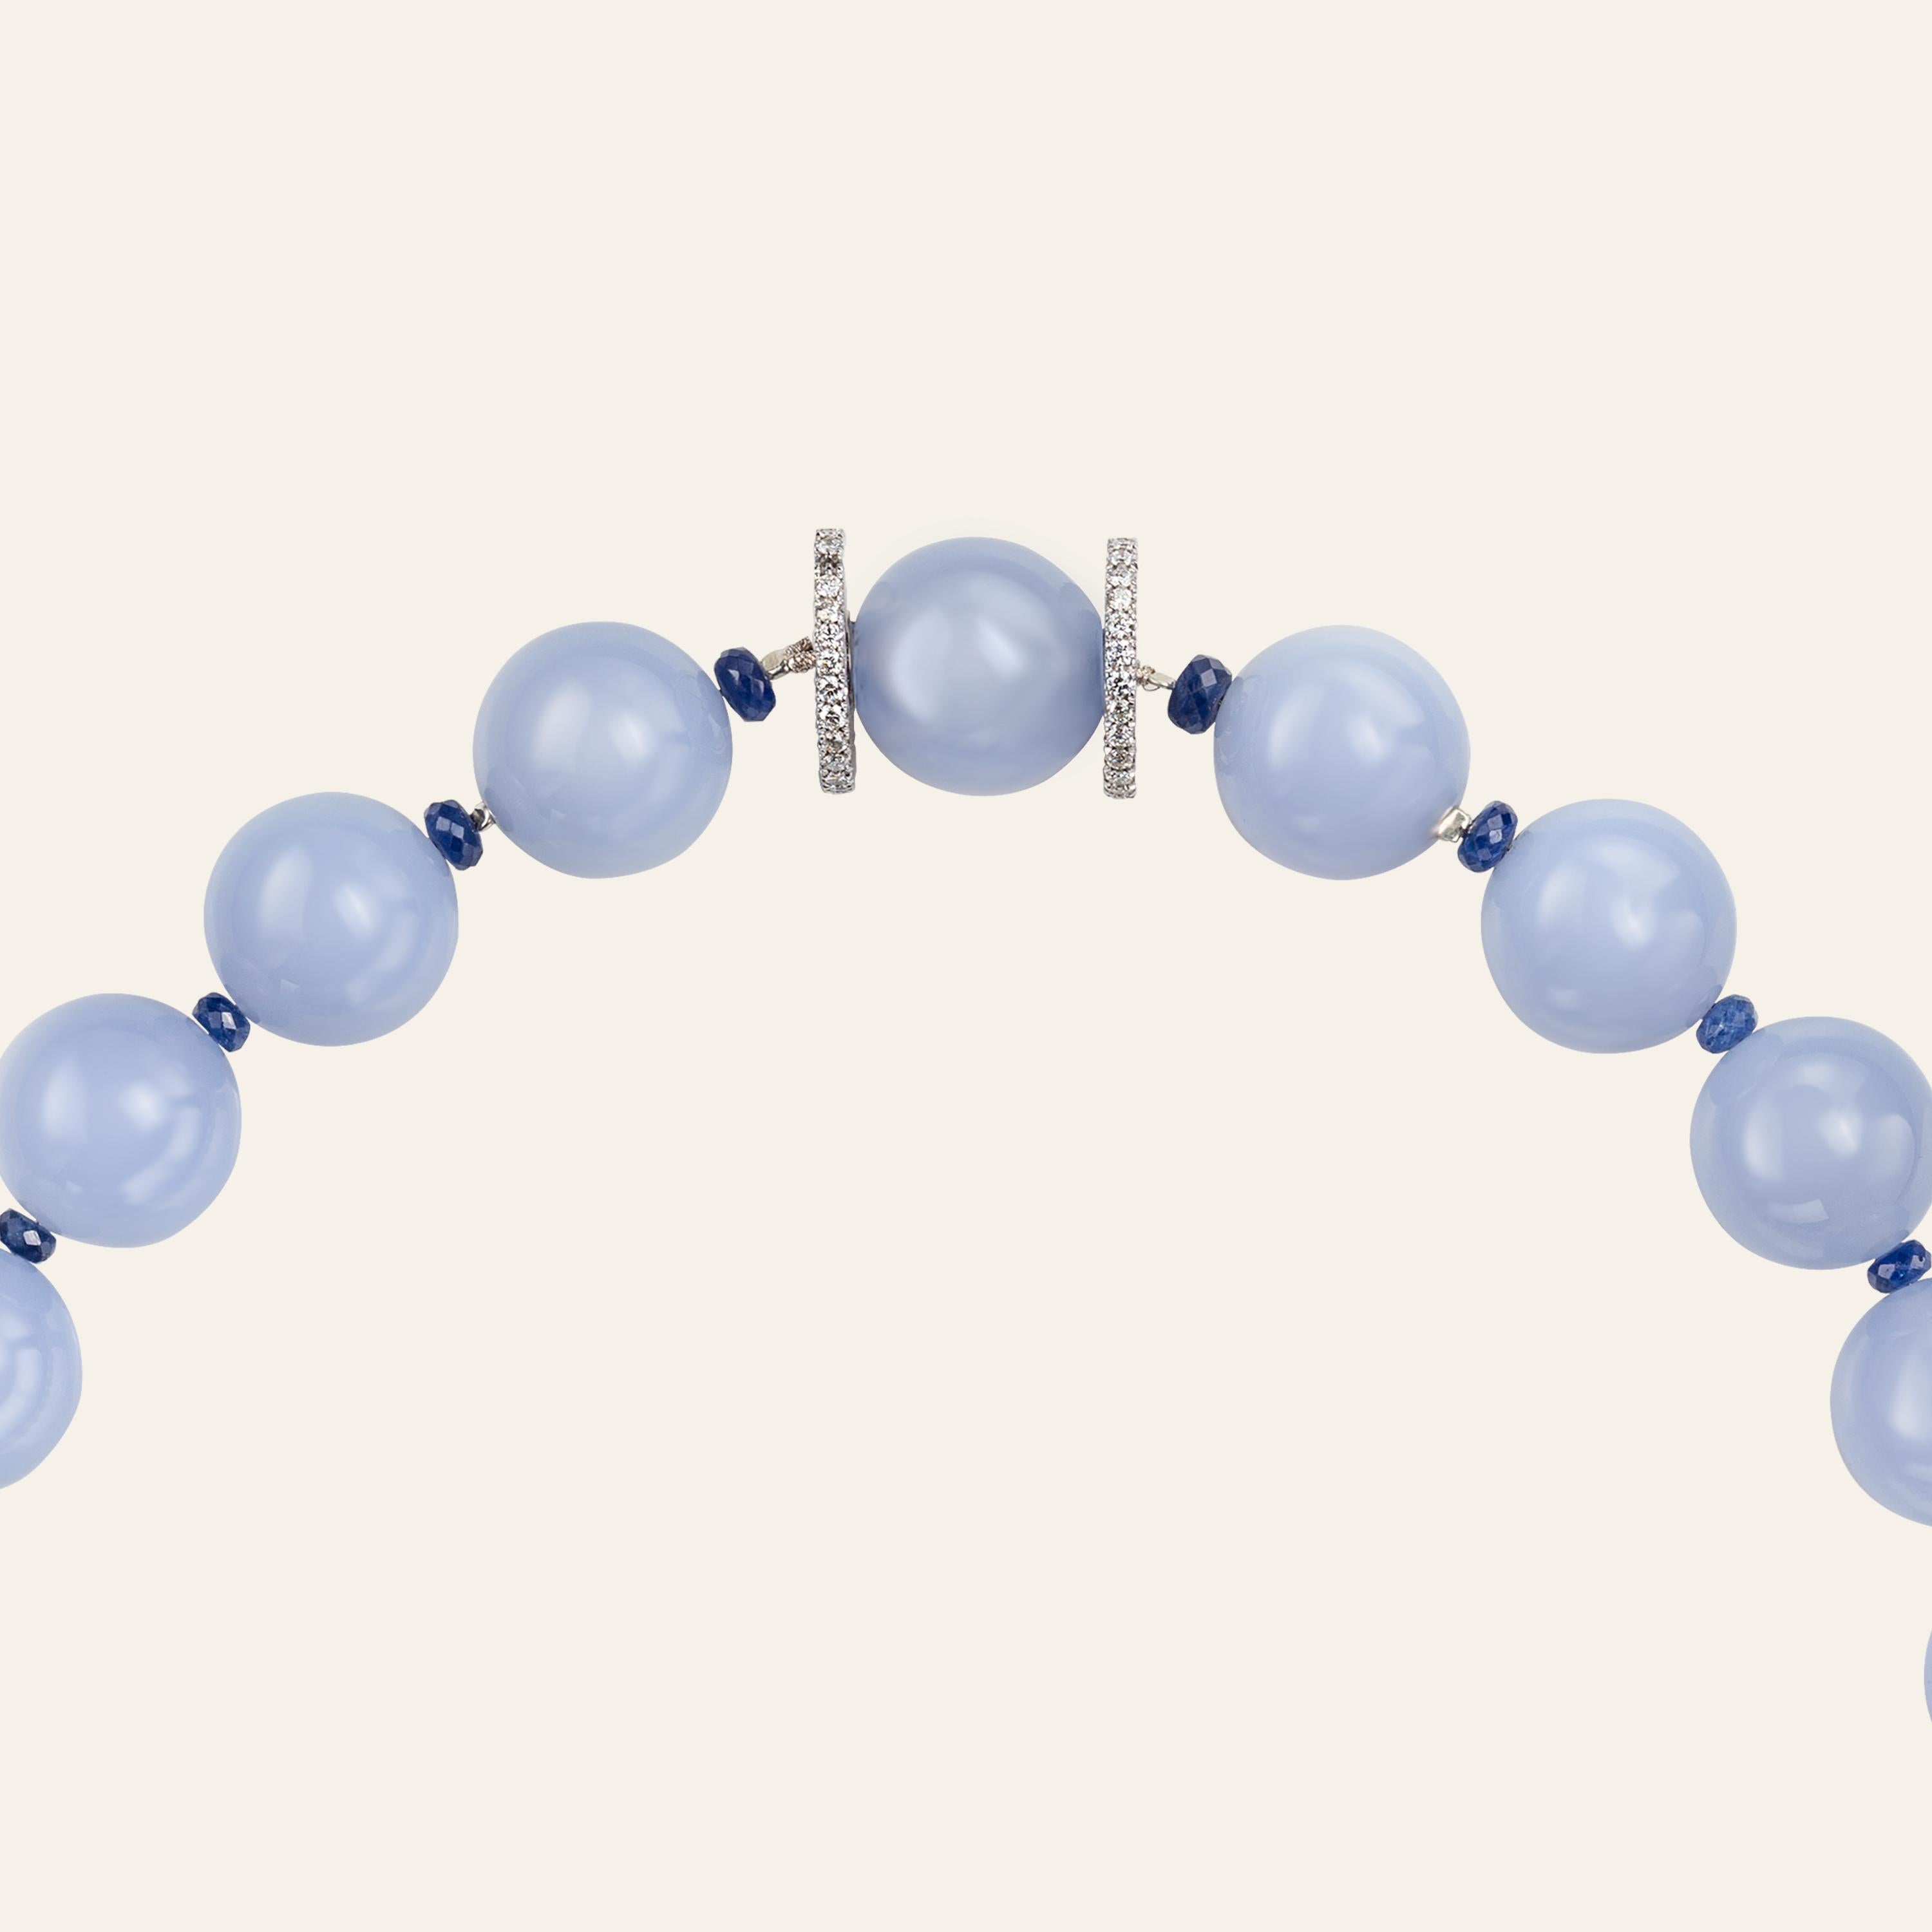 Chalcedony bead necklace, sapphire beads 22,66ct, 18k white gold and diamond rondellas. Gold 12,10
Handmade & designed in Milan, in Via Montenapoleone.
This item comes directly from the Sabbadini boutique & is not a second hand piece.